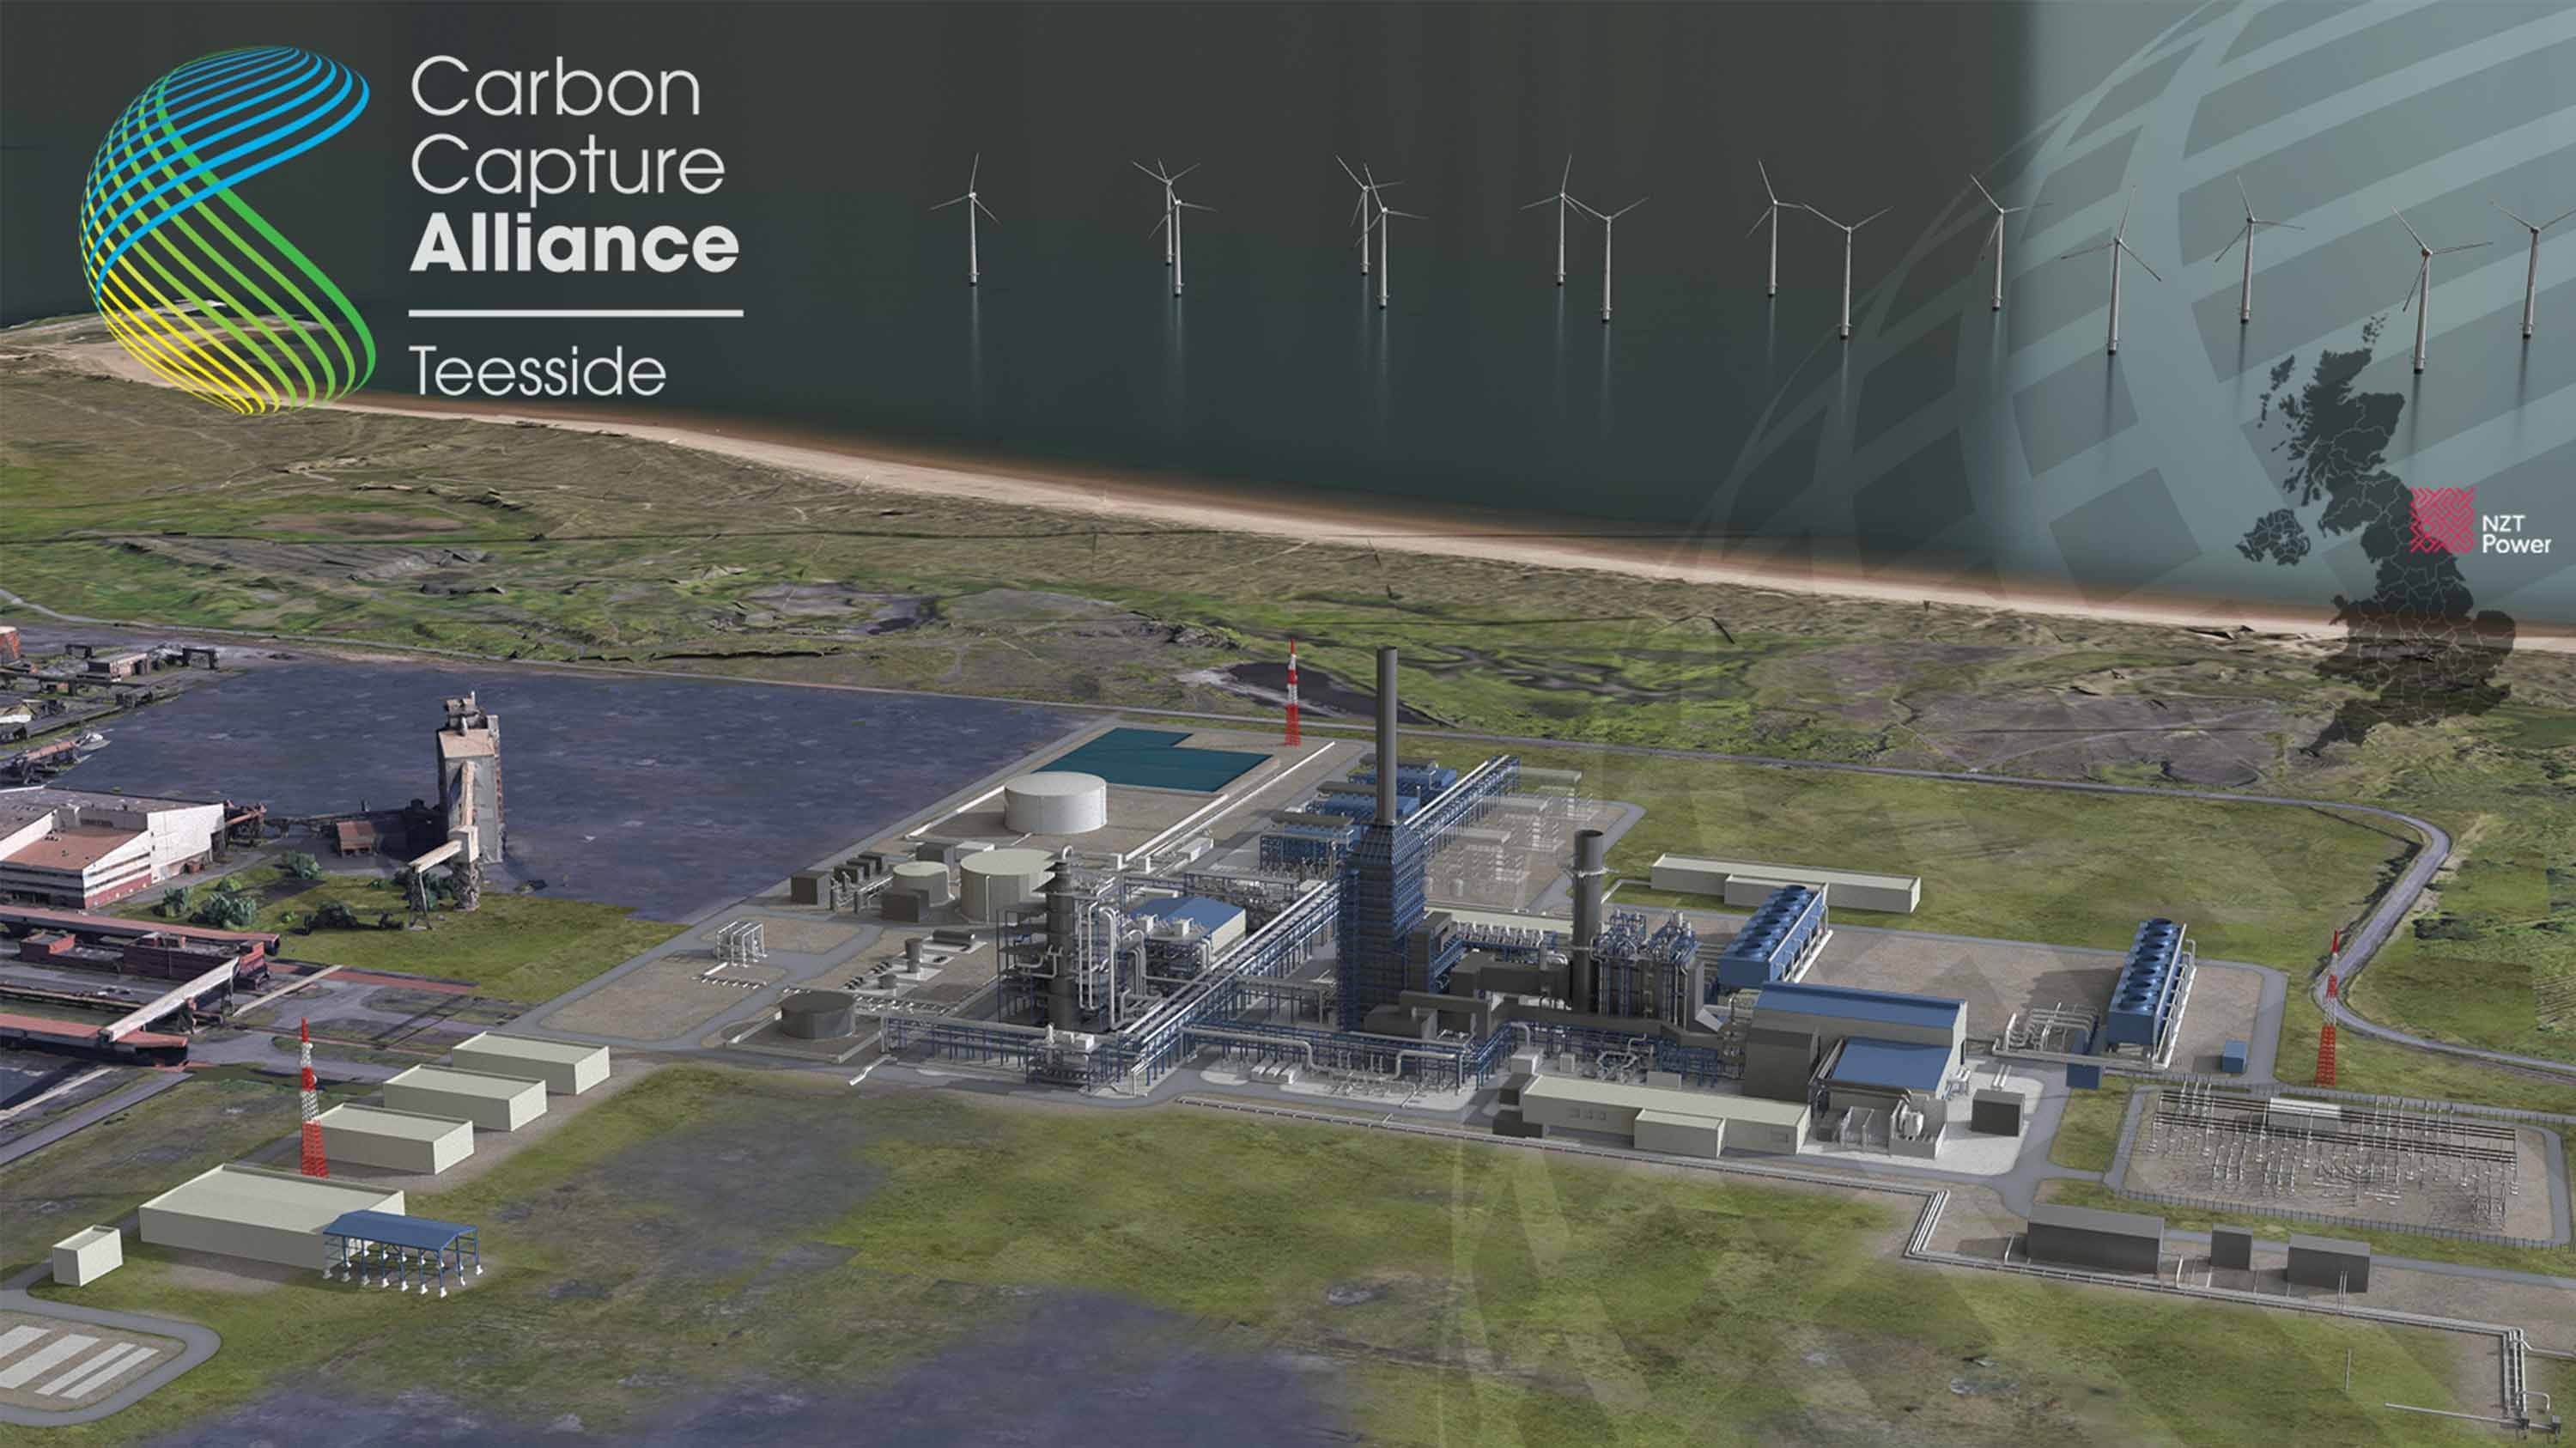 domestic power image with Technip Energies and Carbon Capture Alliance Teesside